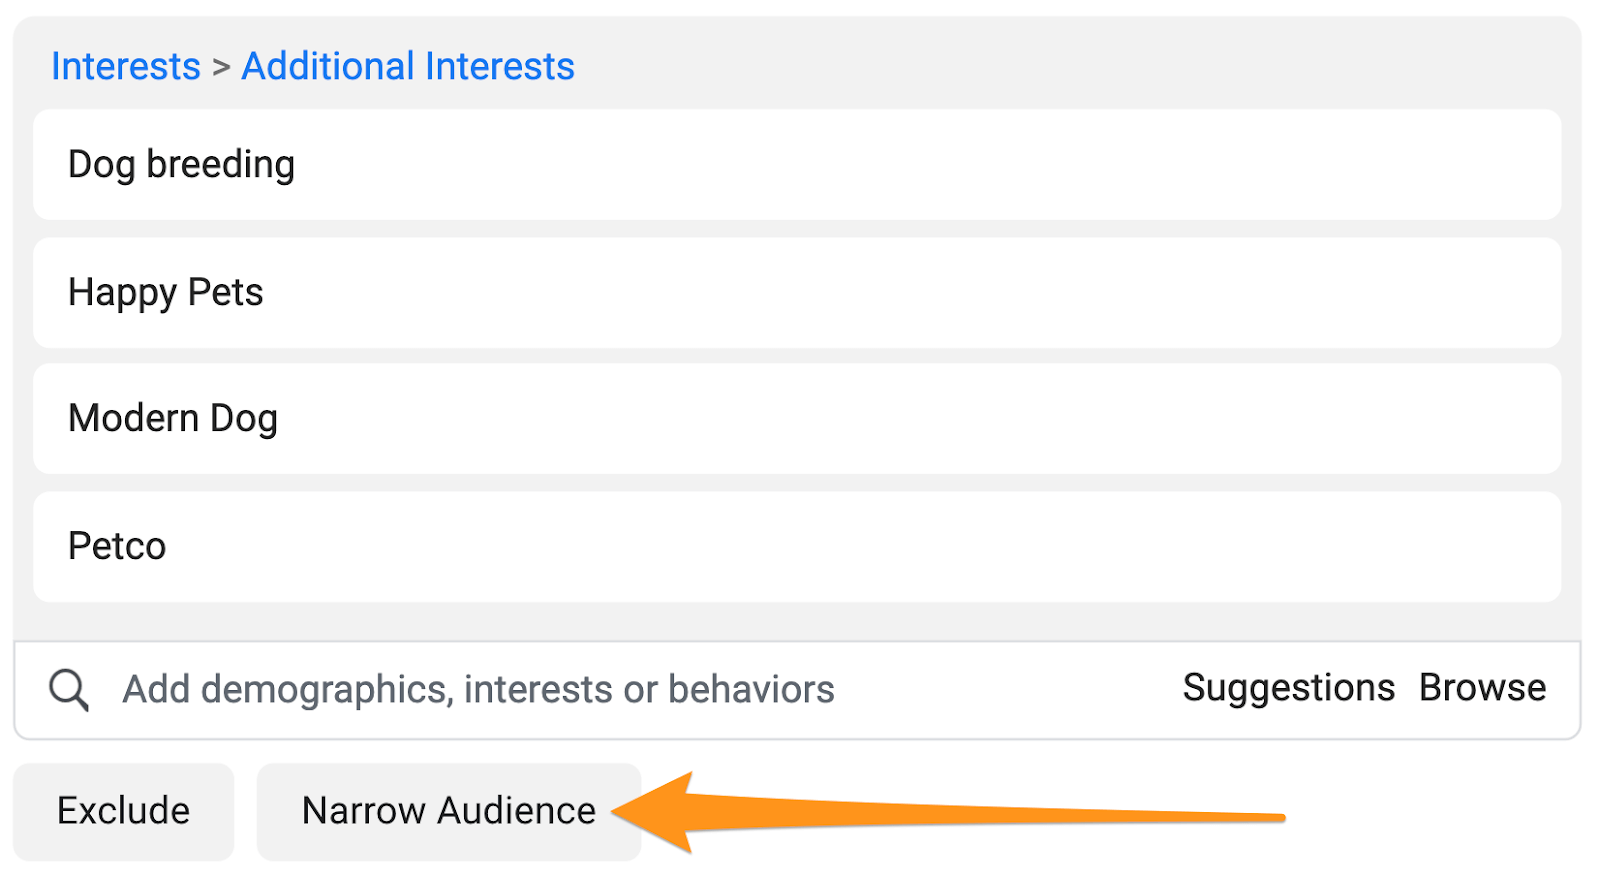 narrow audience interests